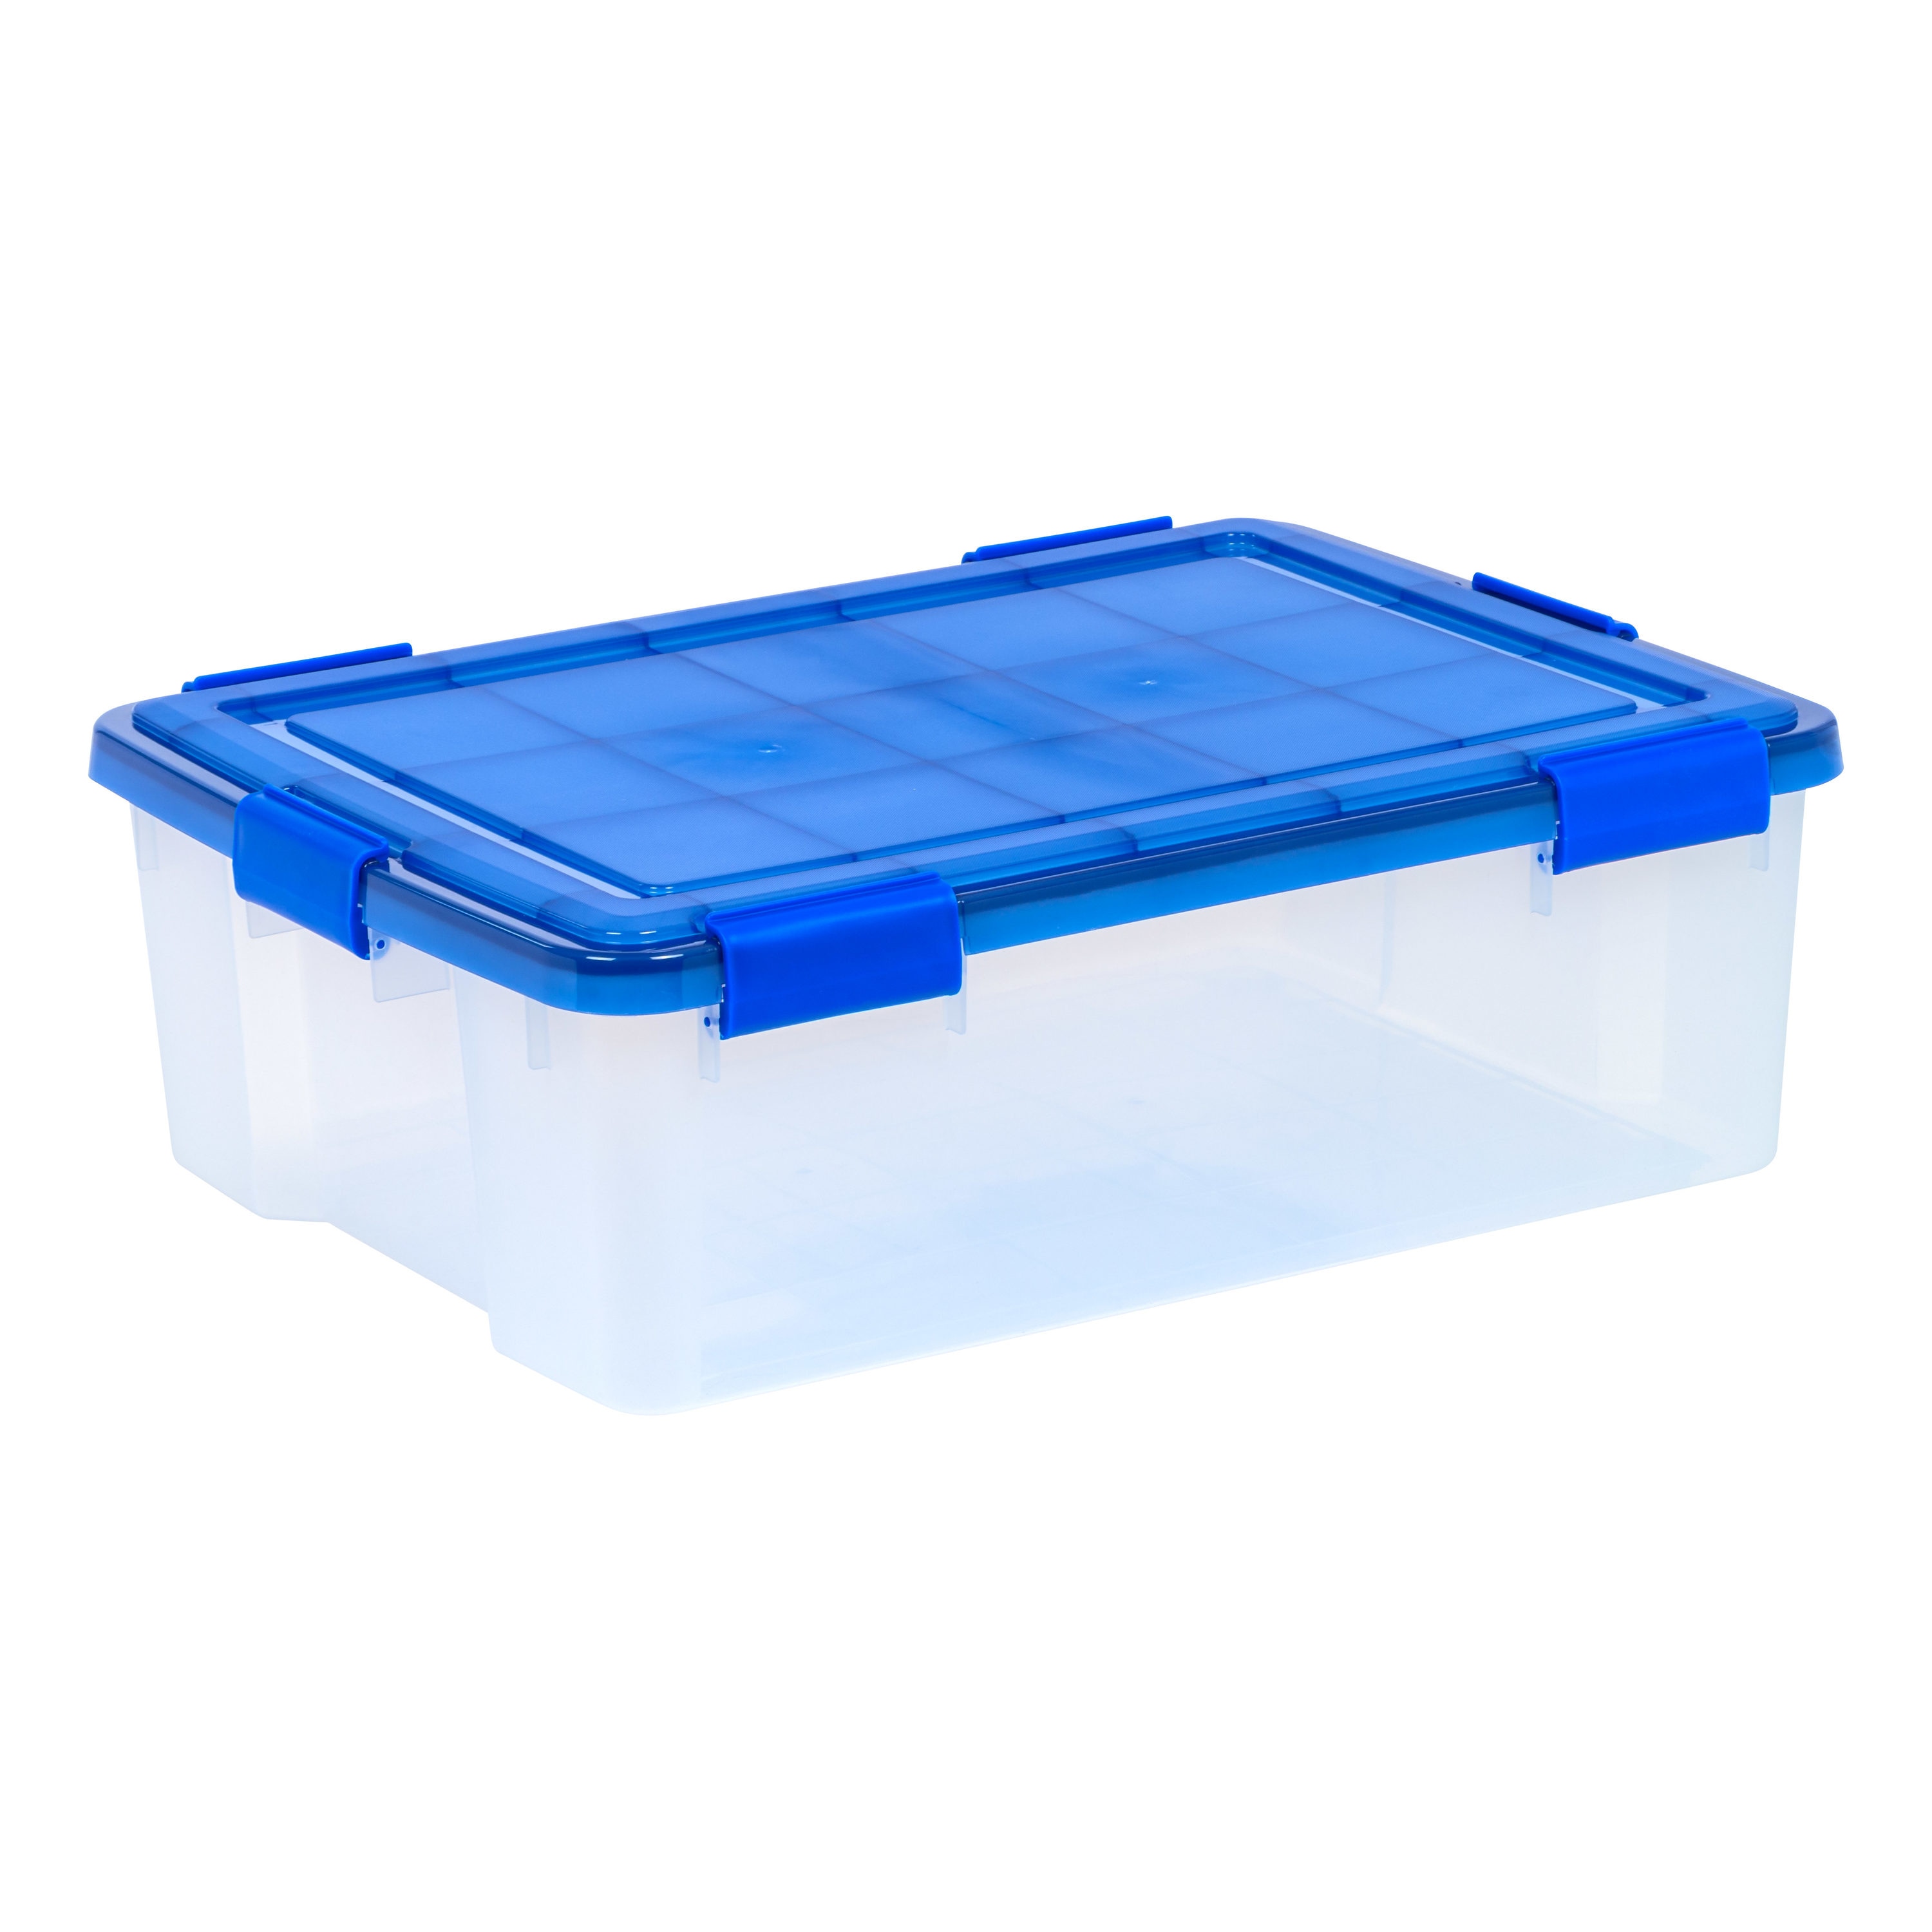 Idl Packaging 10-Gallon Industrial Plastic Tote with Hinged Lids, Blue, Pack of 1 - Heavy-Duty Large 22 L x 15 W x 9 H Container for Warehouses